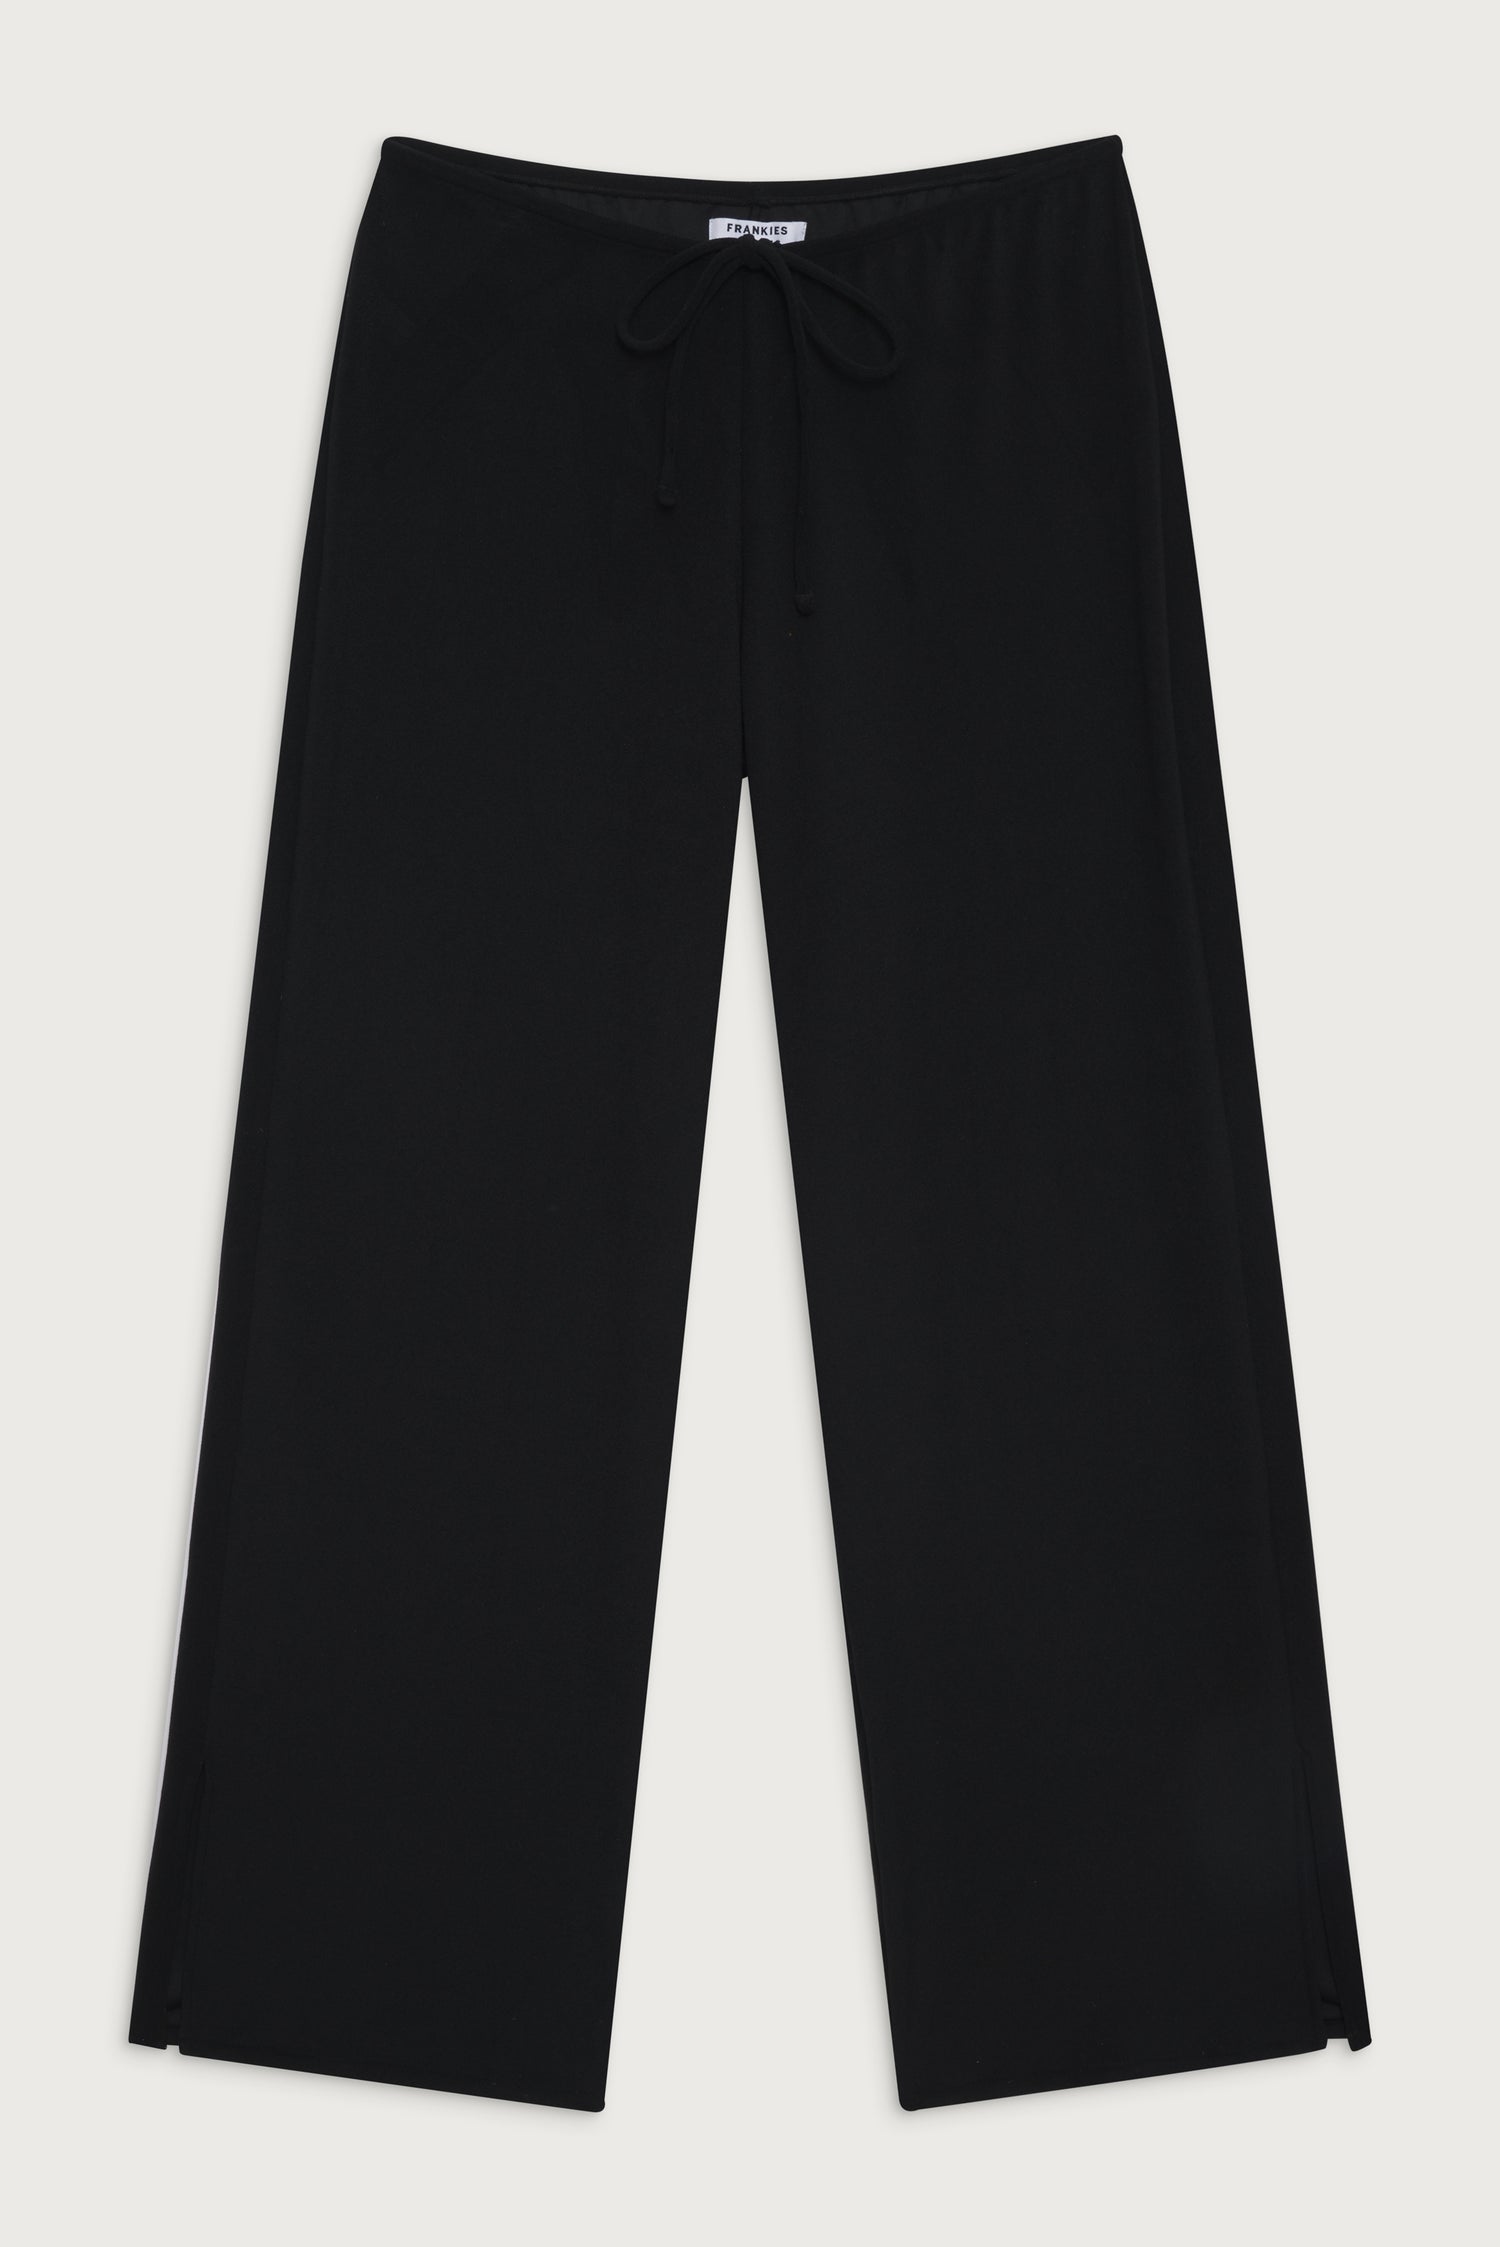 Daisy Terry Low Rise Pant - Black